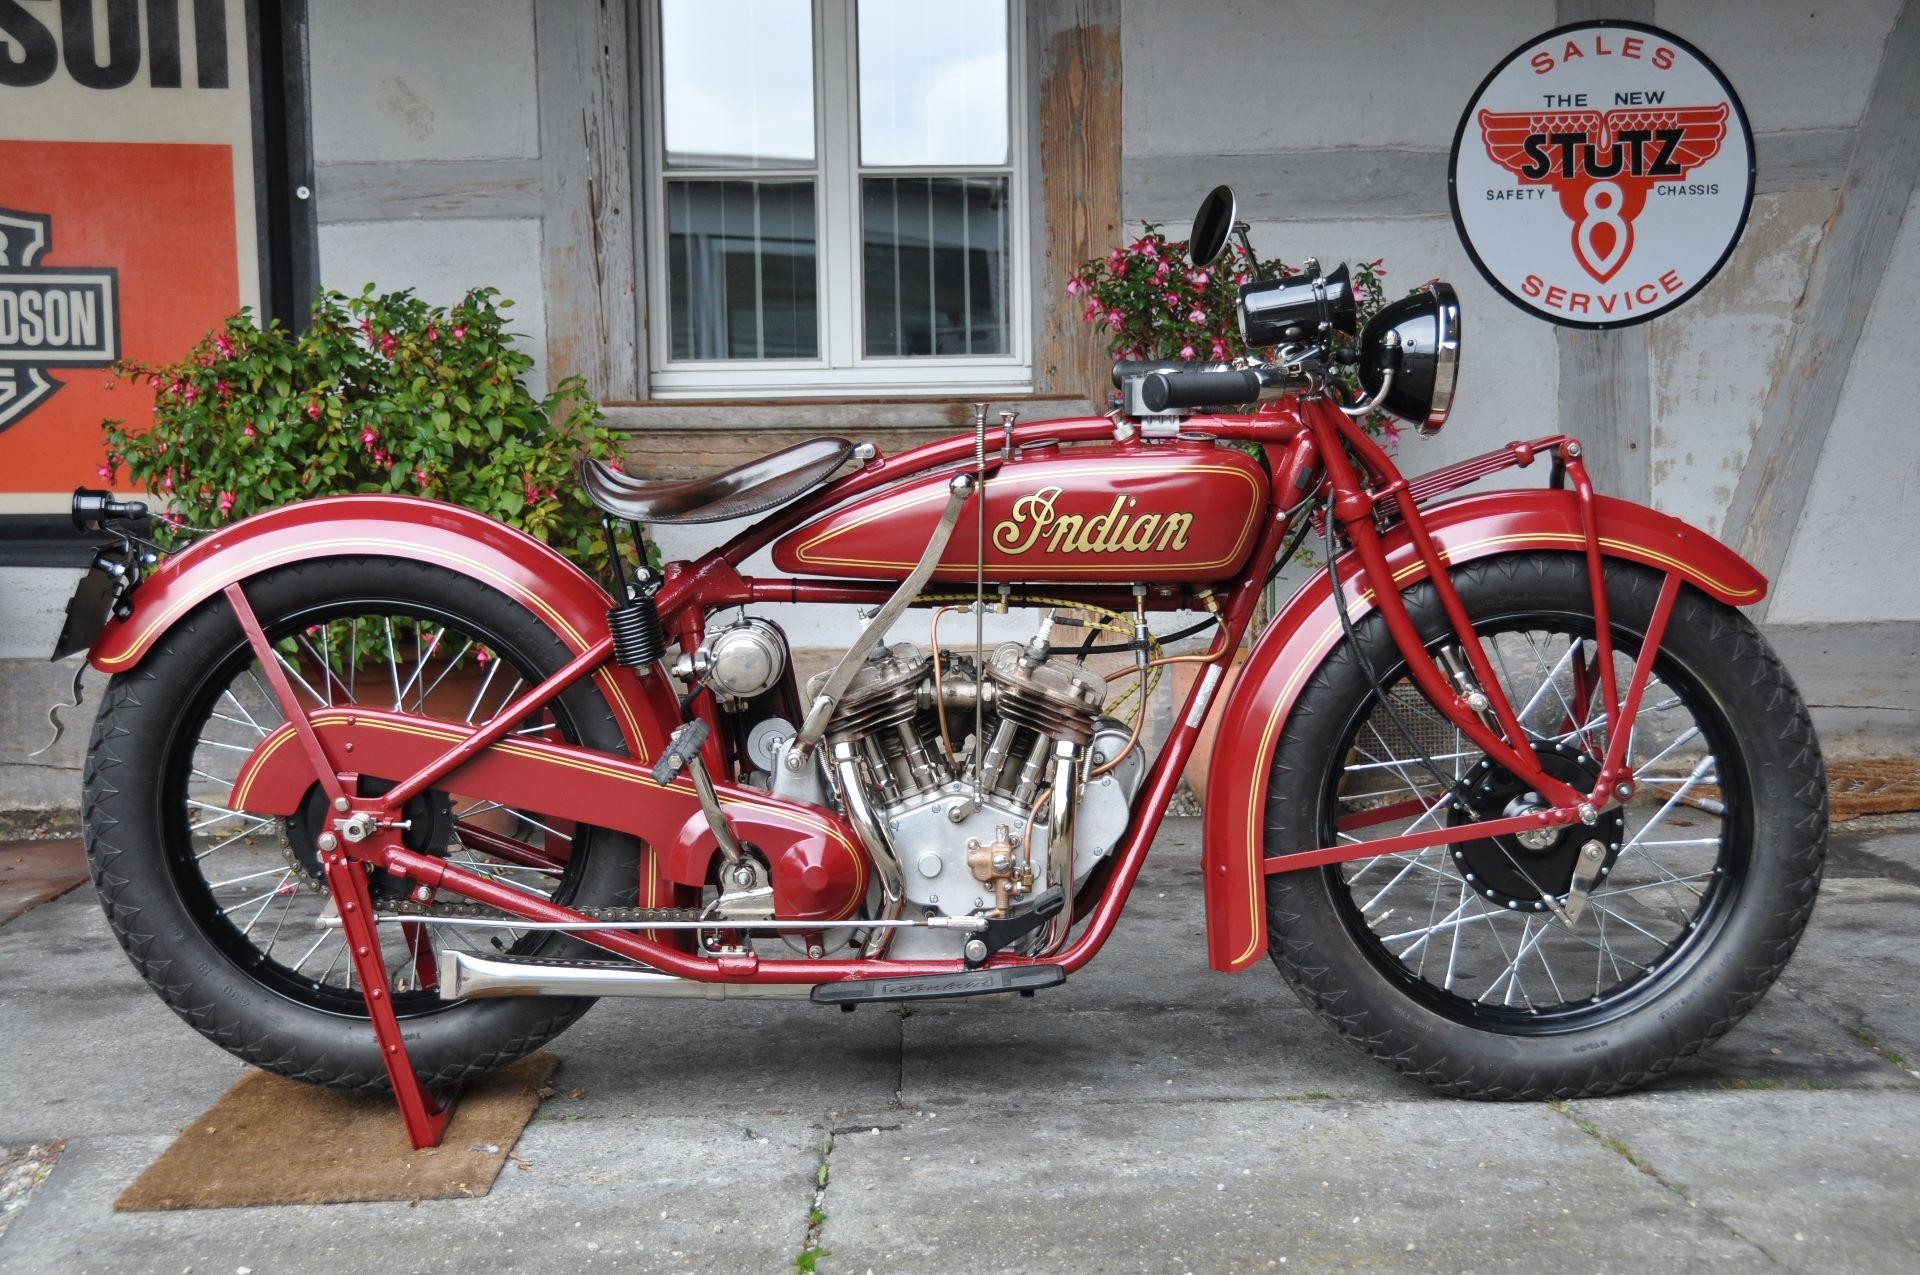 33 best images about 1920s motorcycle on Pinterest